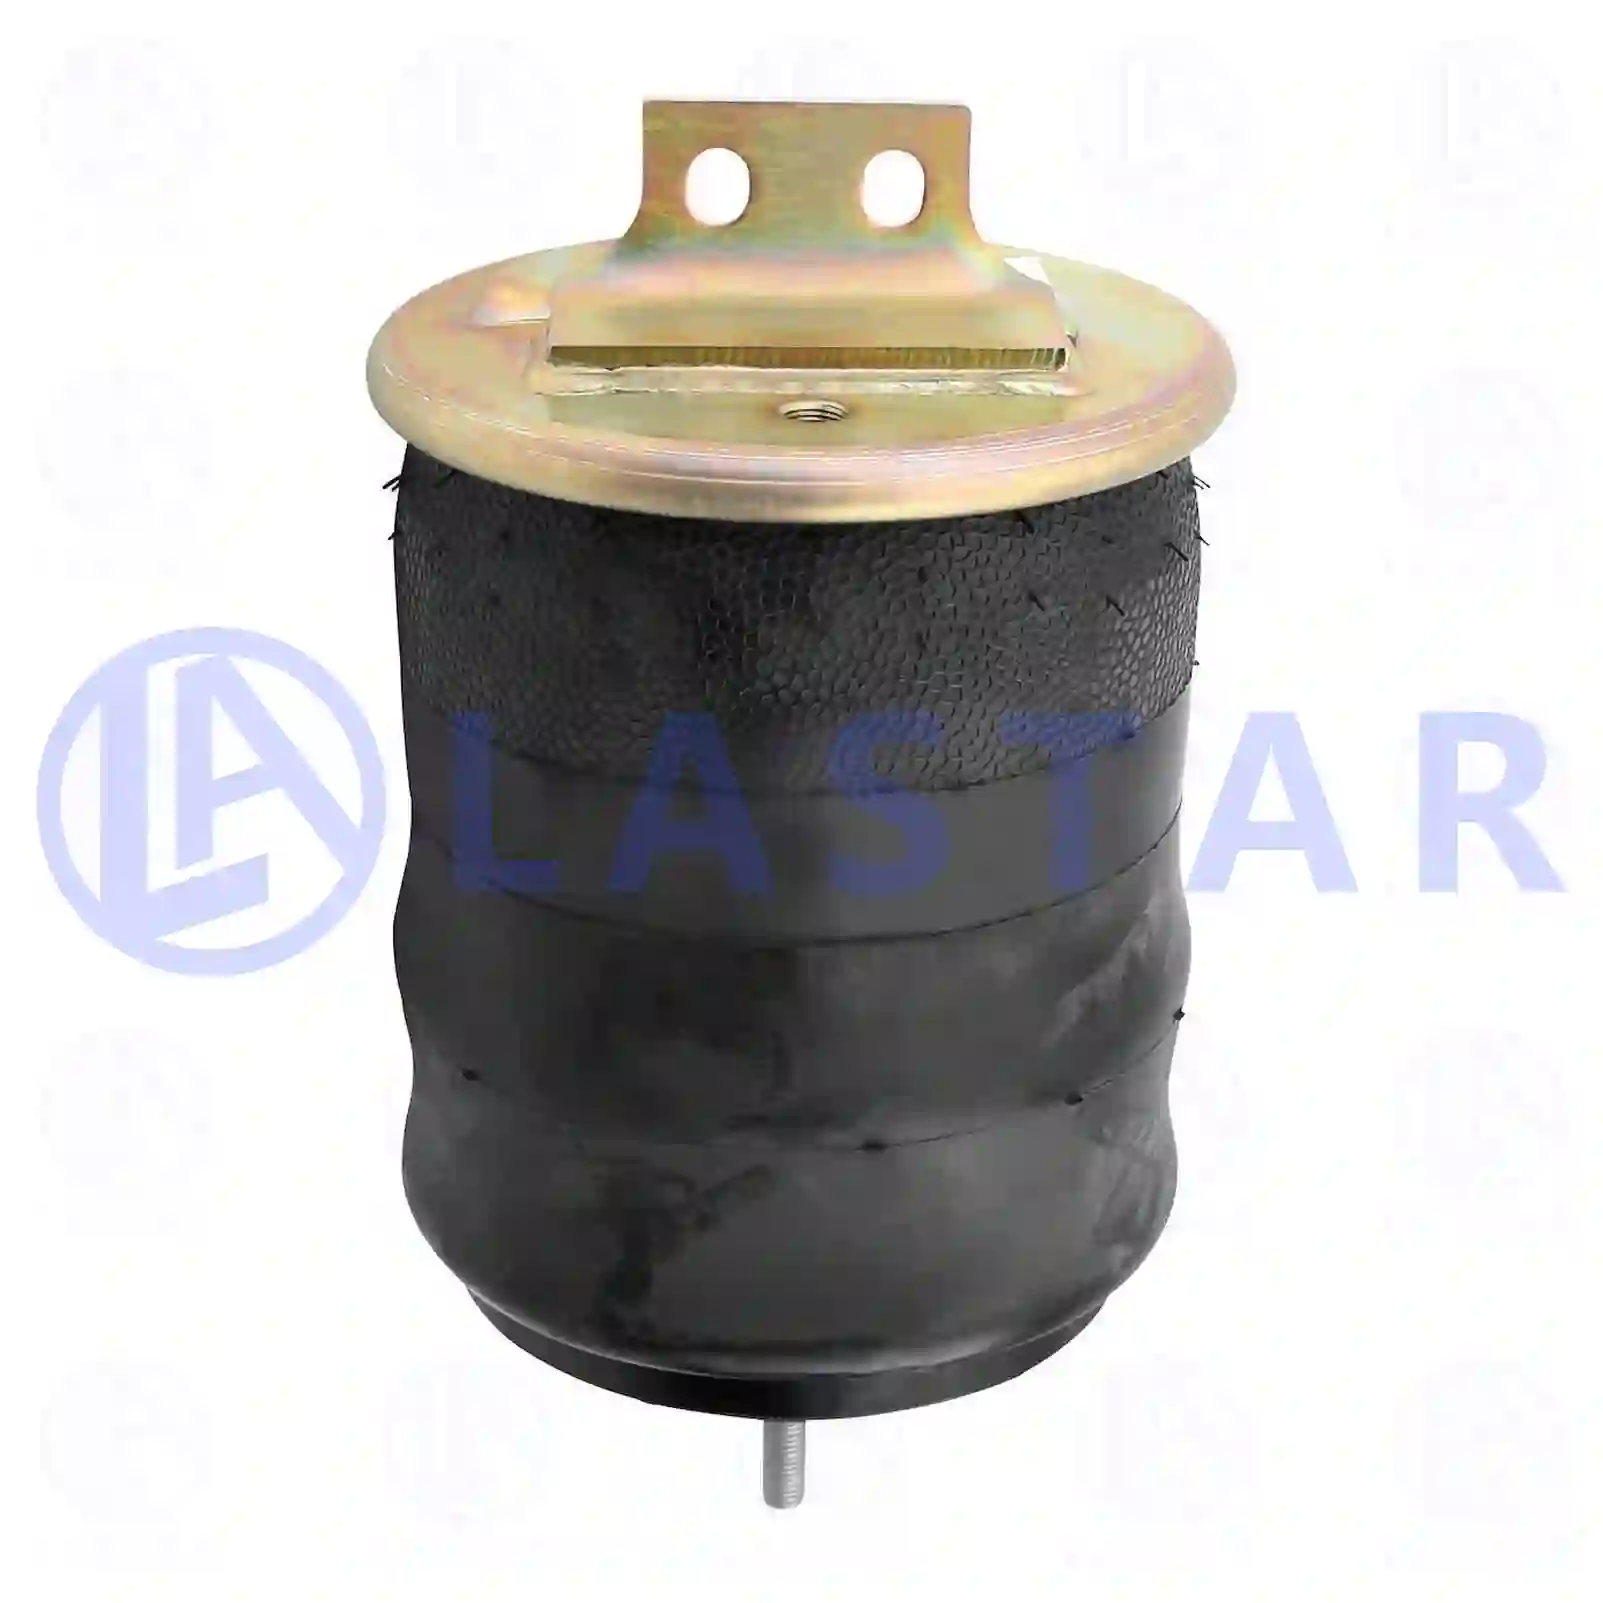 Air spring, with plastic piston, 77727633, 41225898, 41270463, ZG40728-0008 ||  77727633 Lastar Spare Part | Truck Spare Parts, Auotomotive Spare Parts Air spring, with plastic piston, 77727633, 41225898, 41270463, ZG40728-0008 ||  77727633 Lastar Spare Part | Truck Spare Parts, Auotomotive Spare Parts